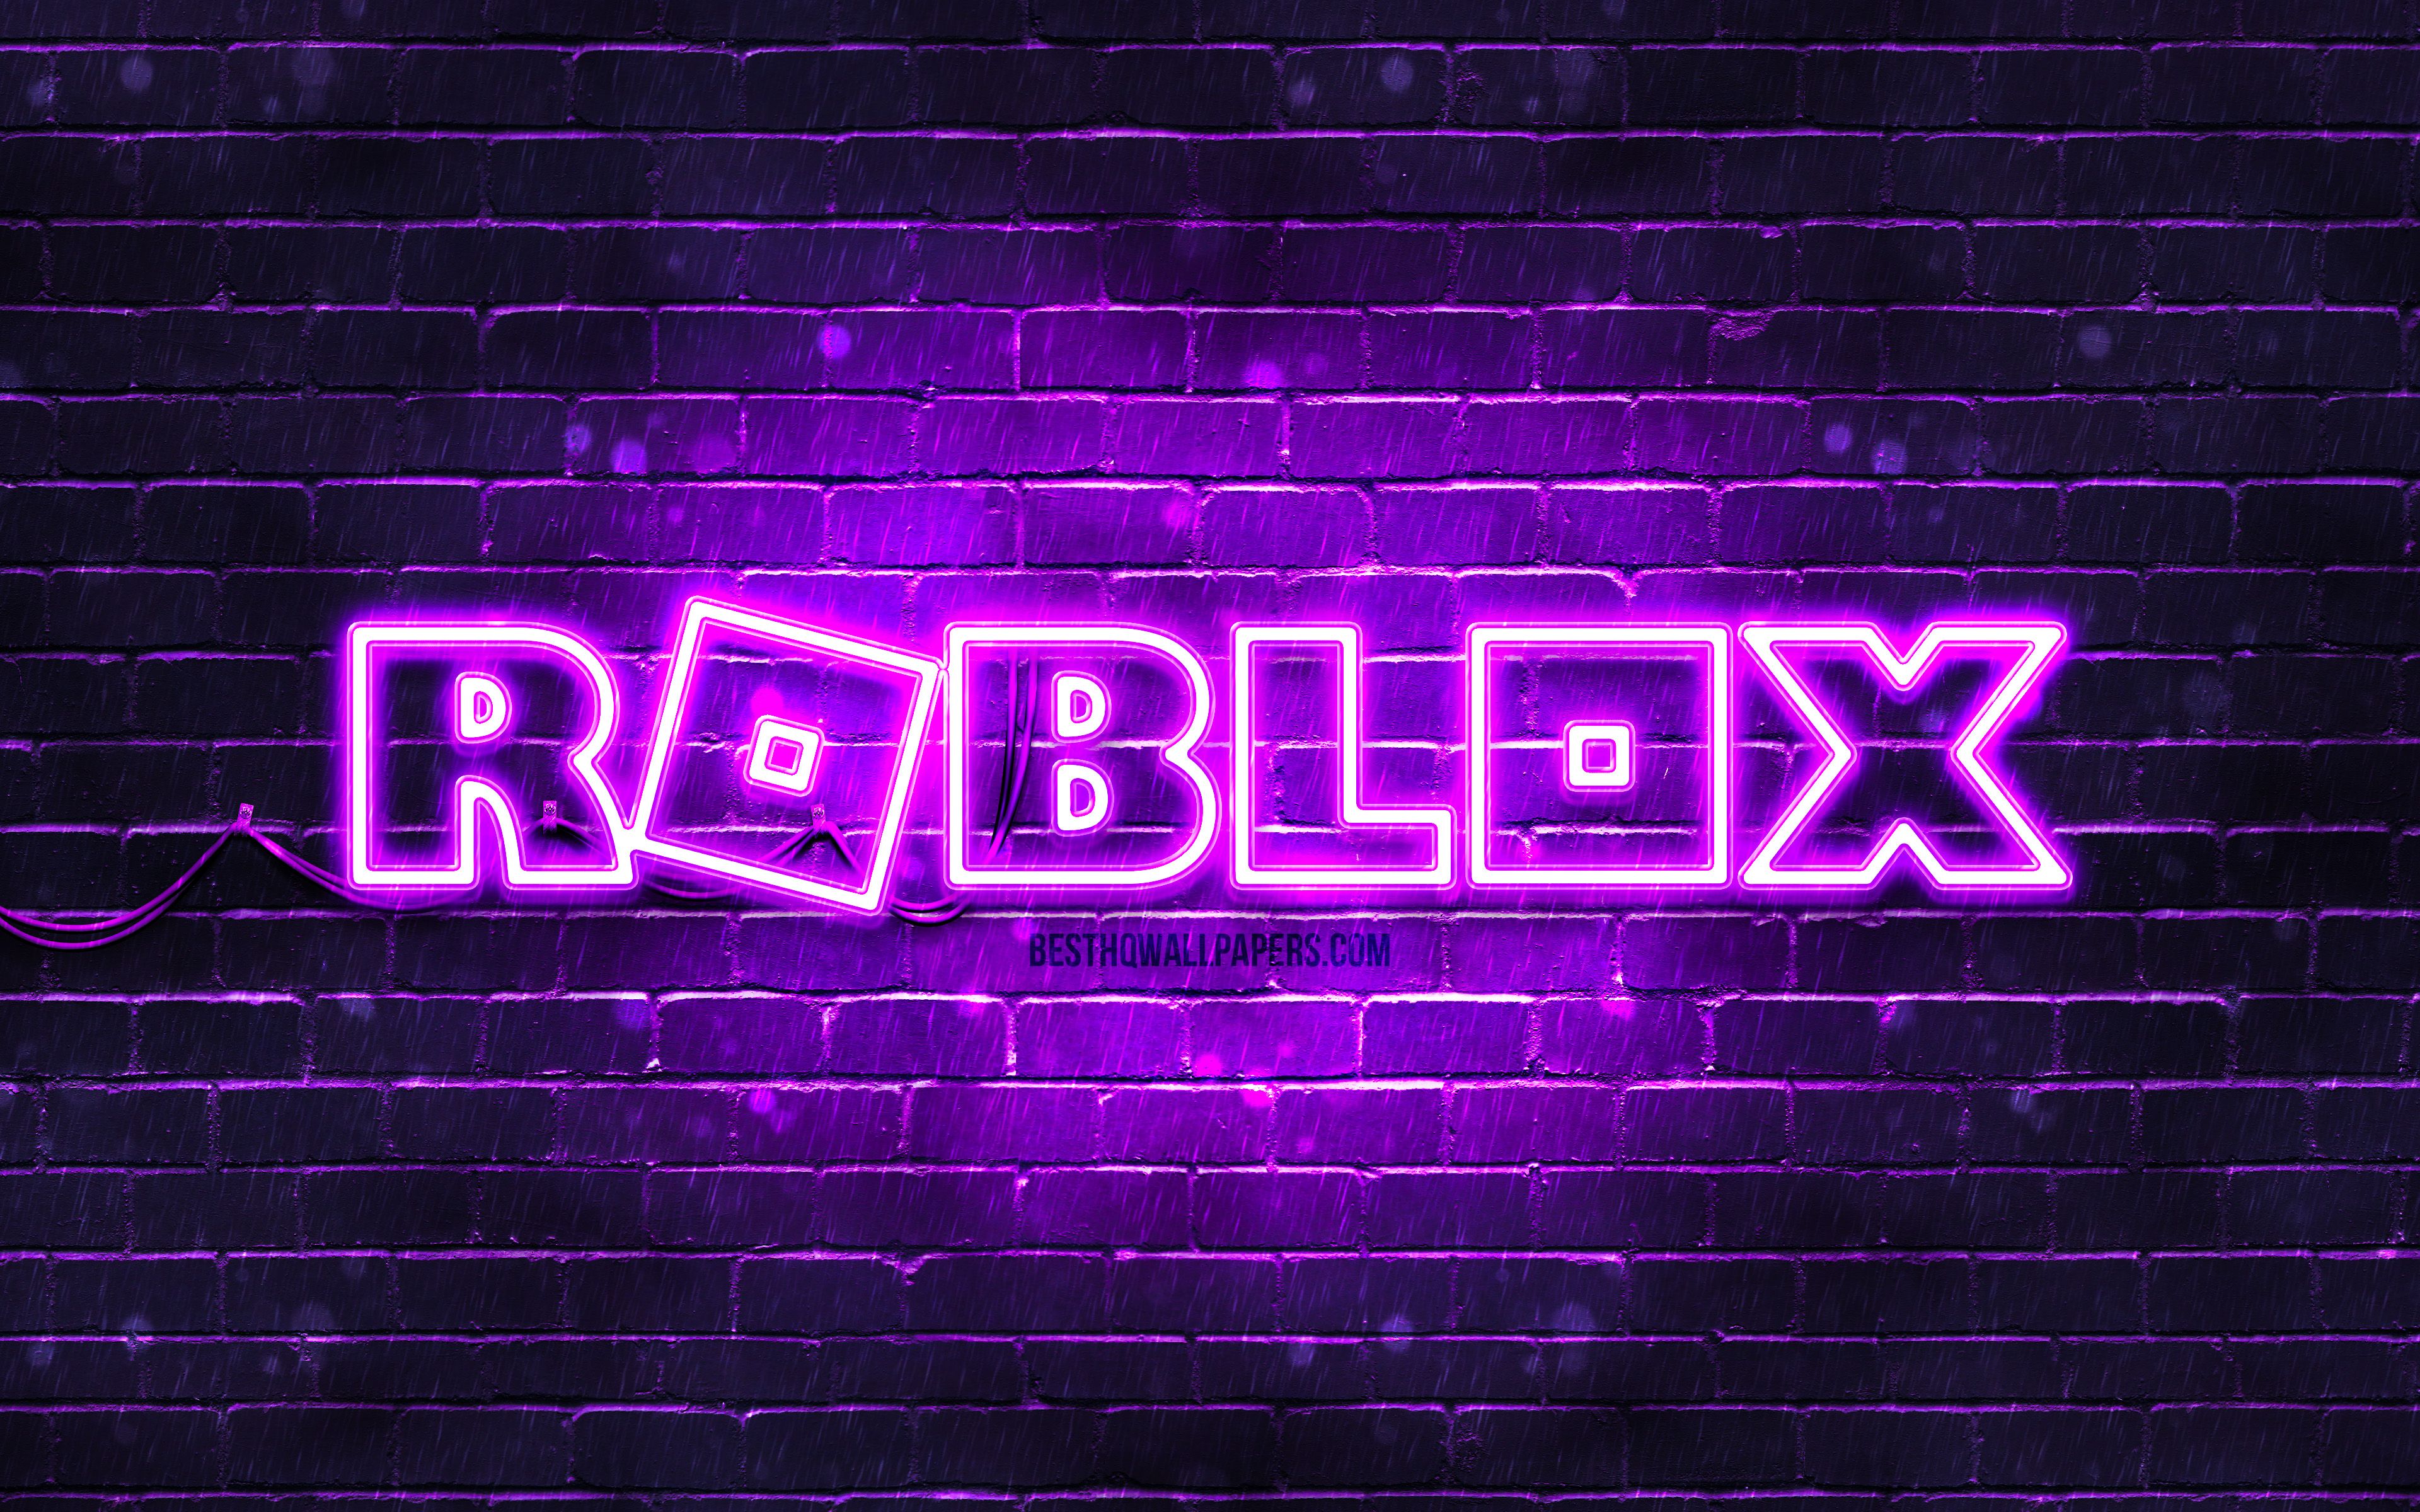 Download wallpapers Roblox violet logo, 4k, violet brickwall, Roblox logo, online games, Roblox neon logo, Roblox for desktop with resolution 3840x2400. High Quality HD pictures wallpapers